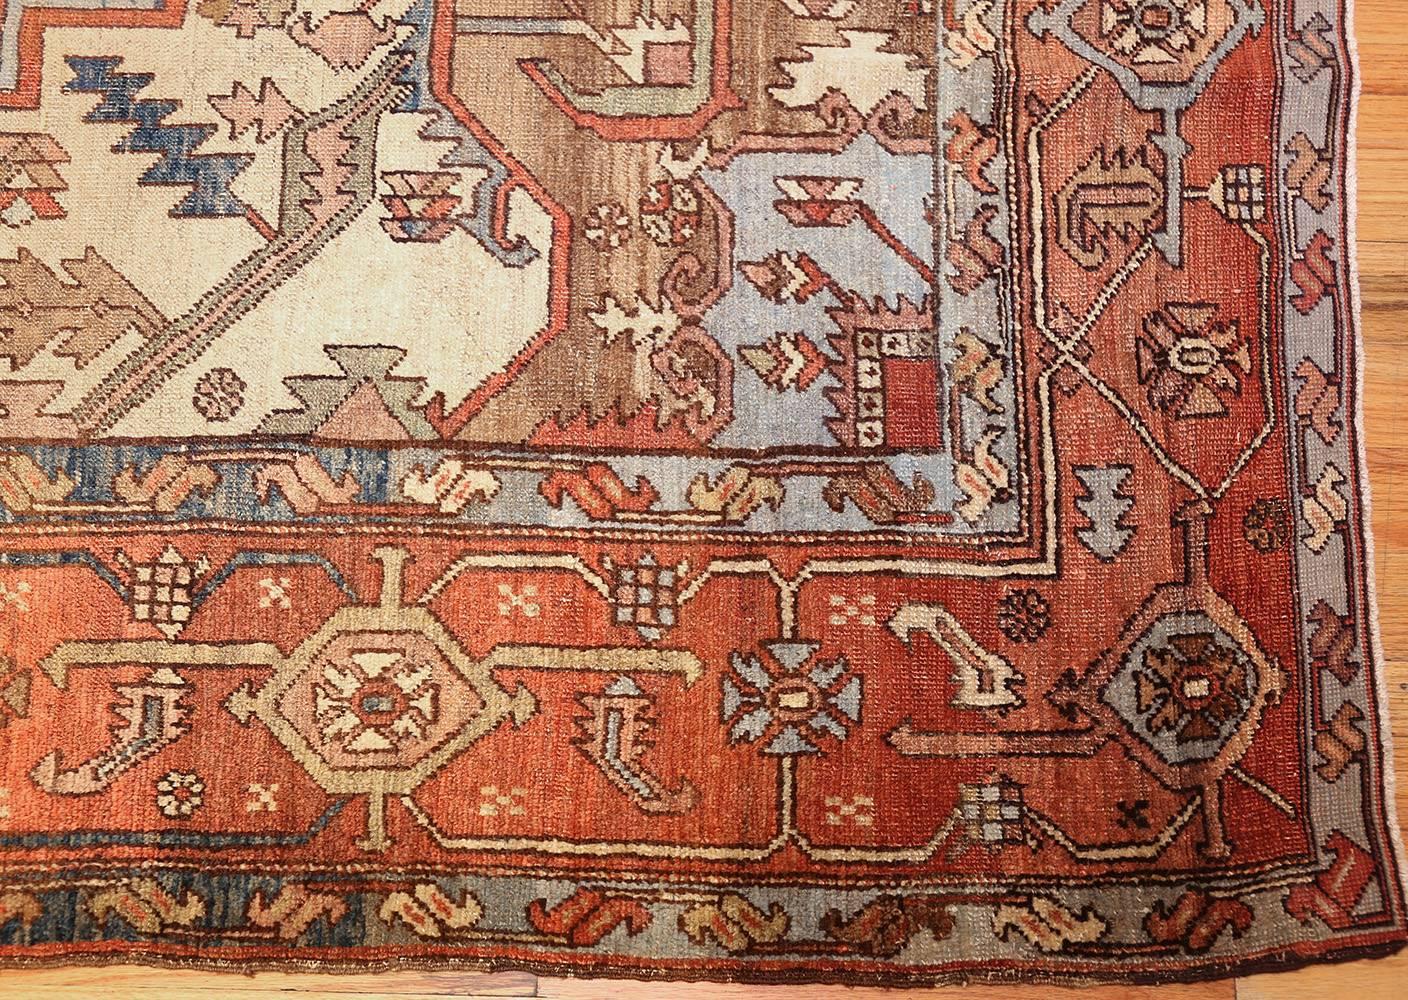 Wool Room Sized Antique Persian Serapi Carpet. Size: 9 ft 9 in x 12 ft 10 in